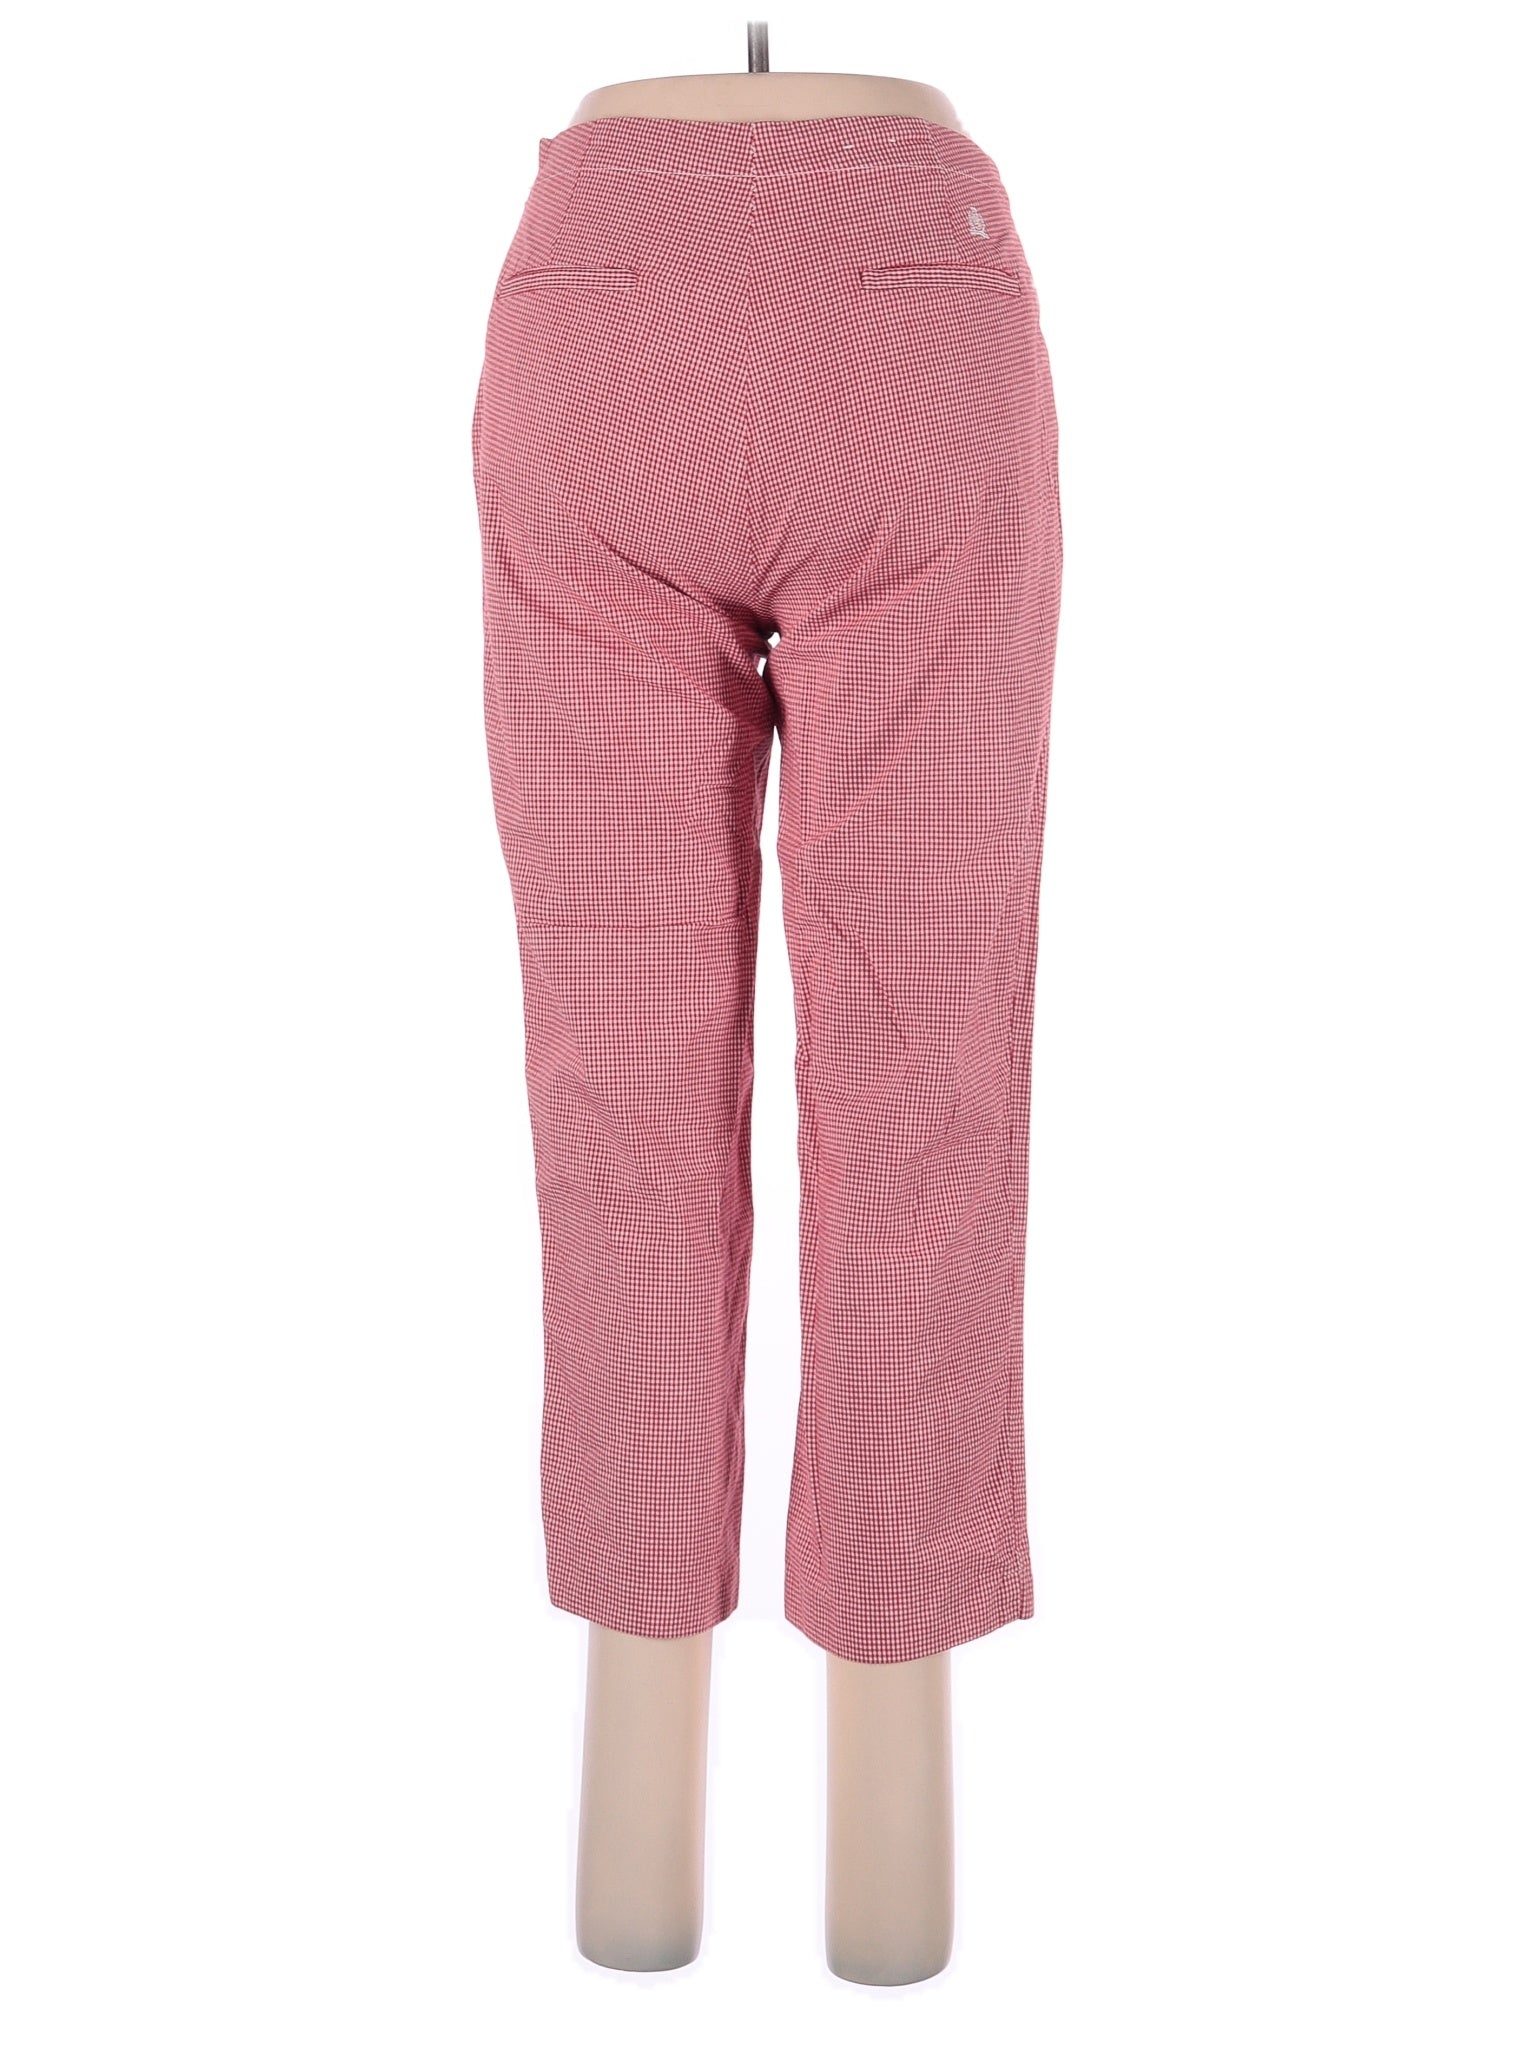 Casual Pants size - 6